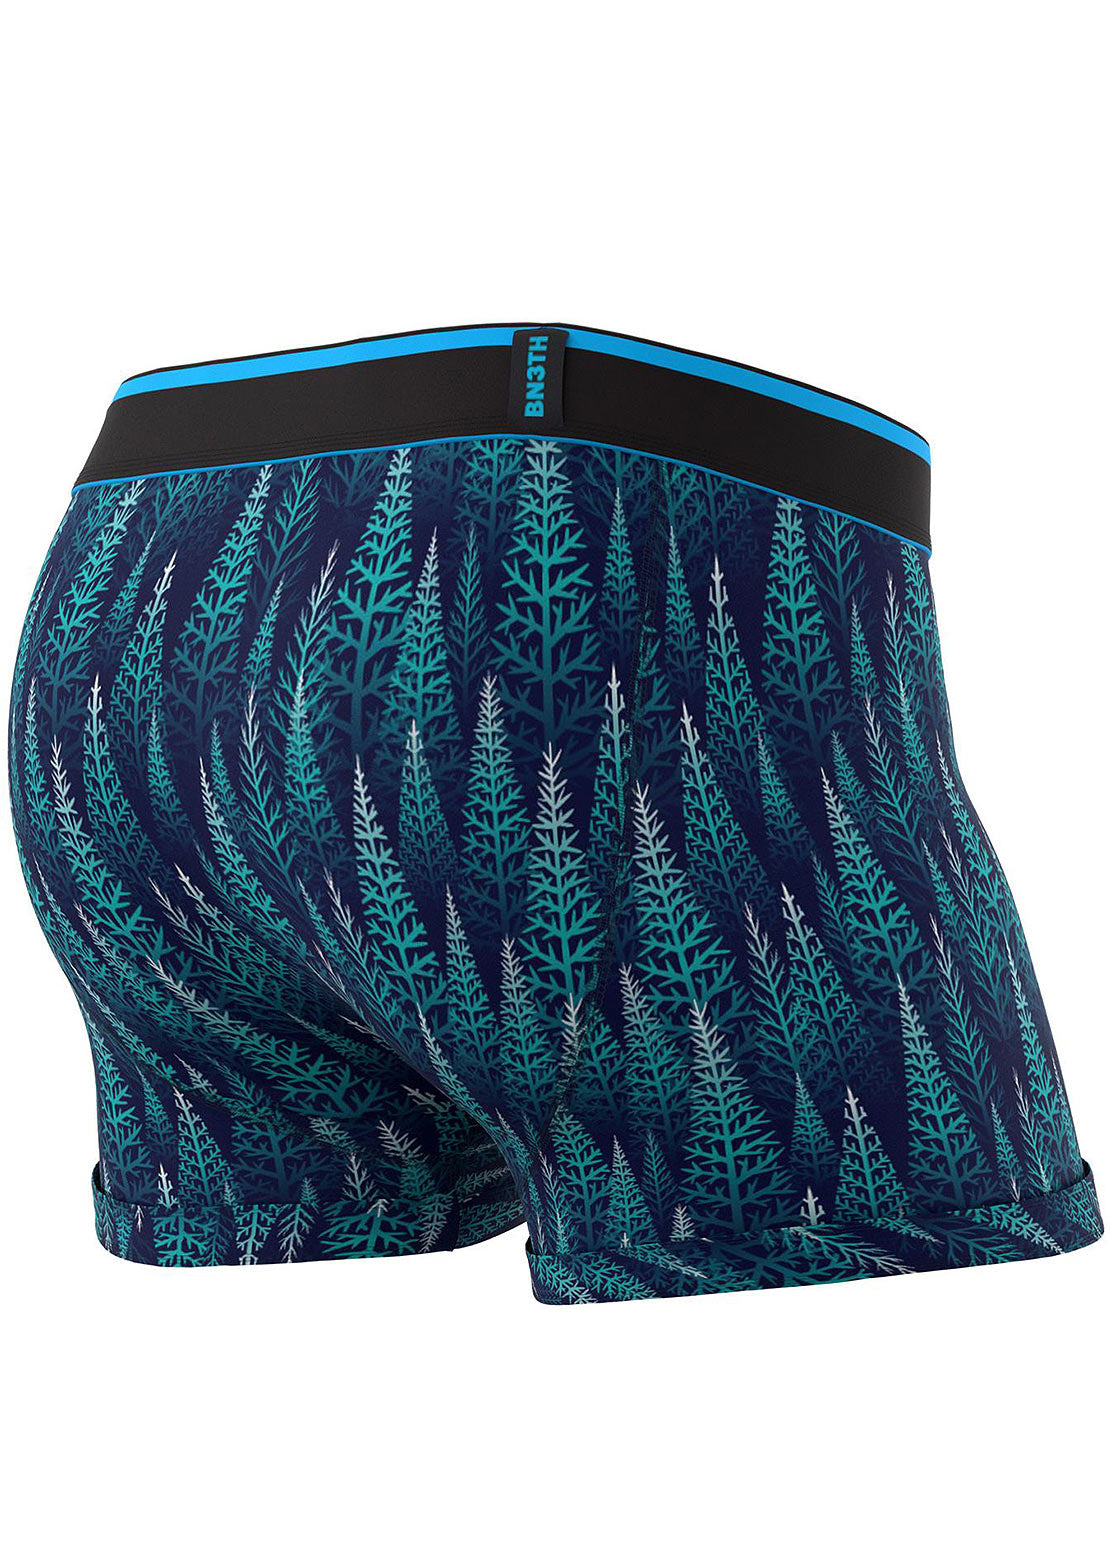 BN3TH Men’s Classic Trunk Print Boxers Glades/Navy